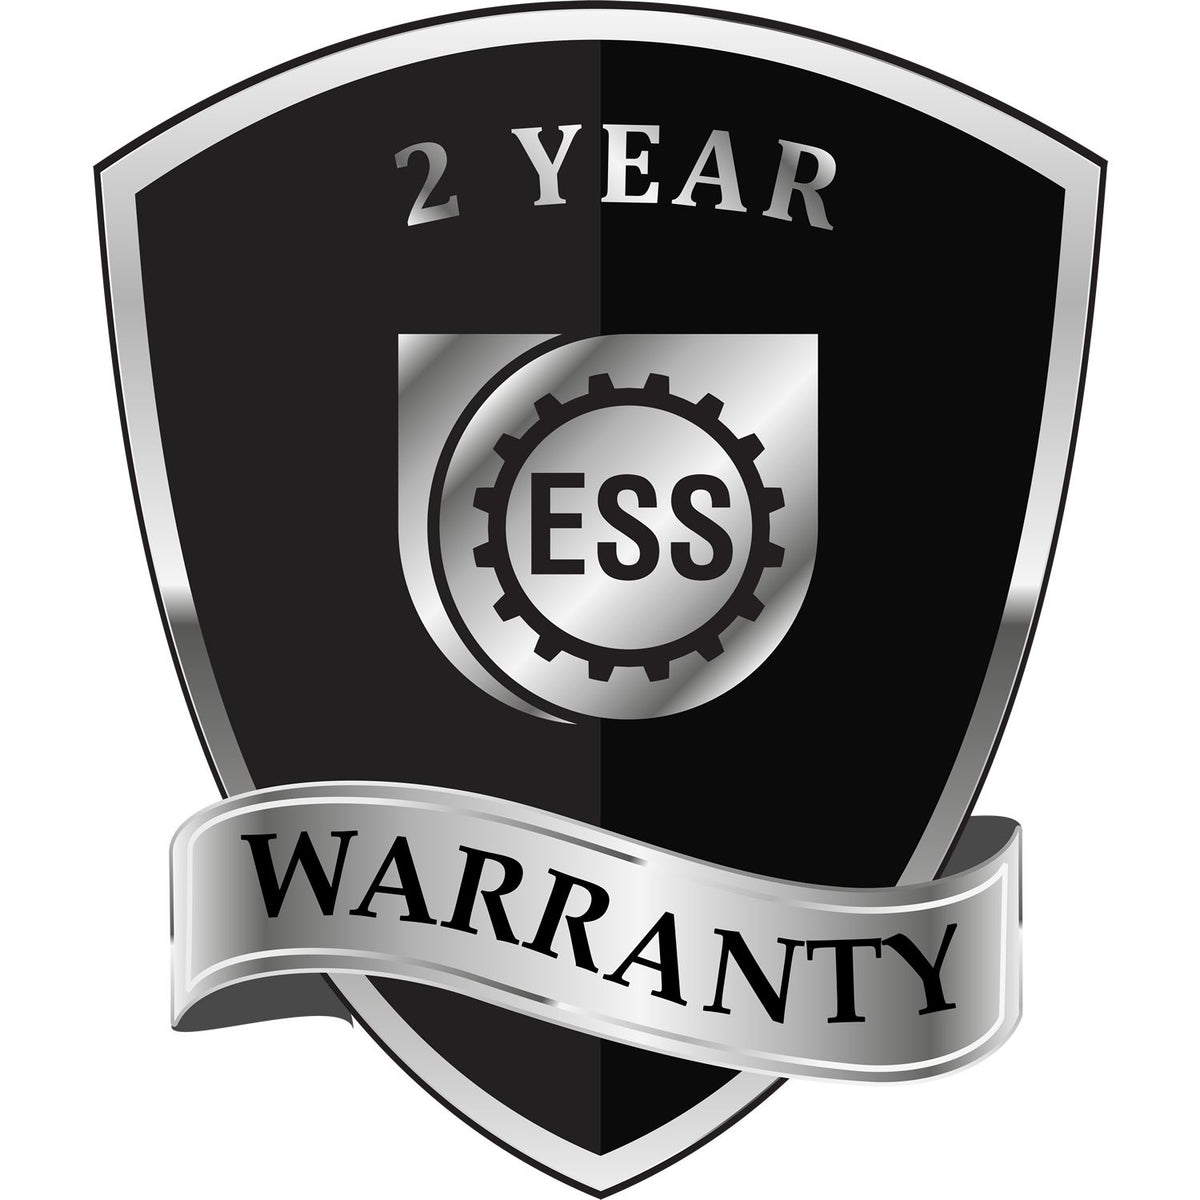 A badge or emblem showing a warranty icon for the Heavy Duty Cast Iron Nevada Architect Embosser